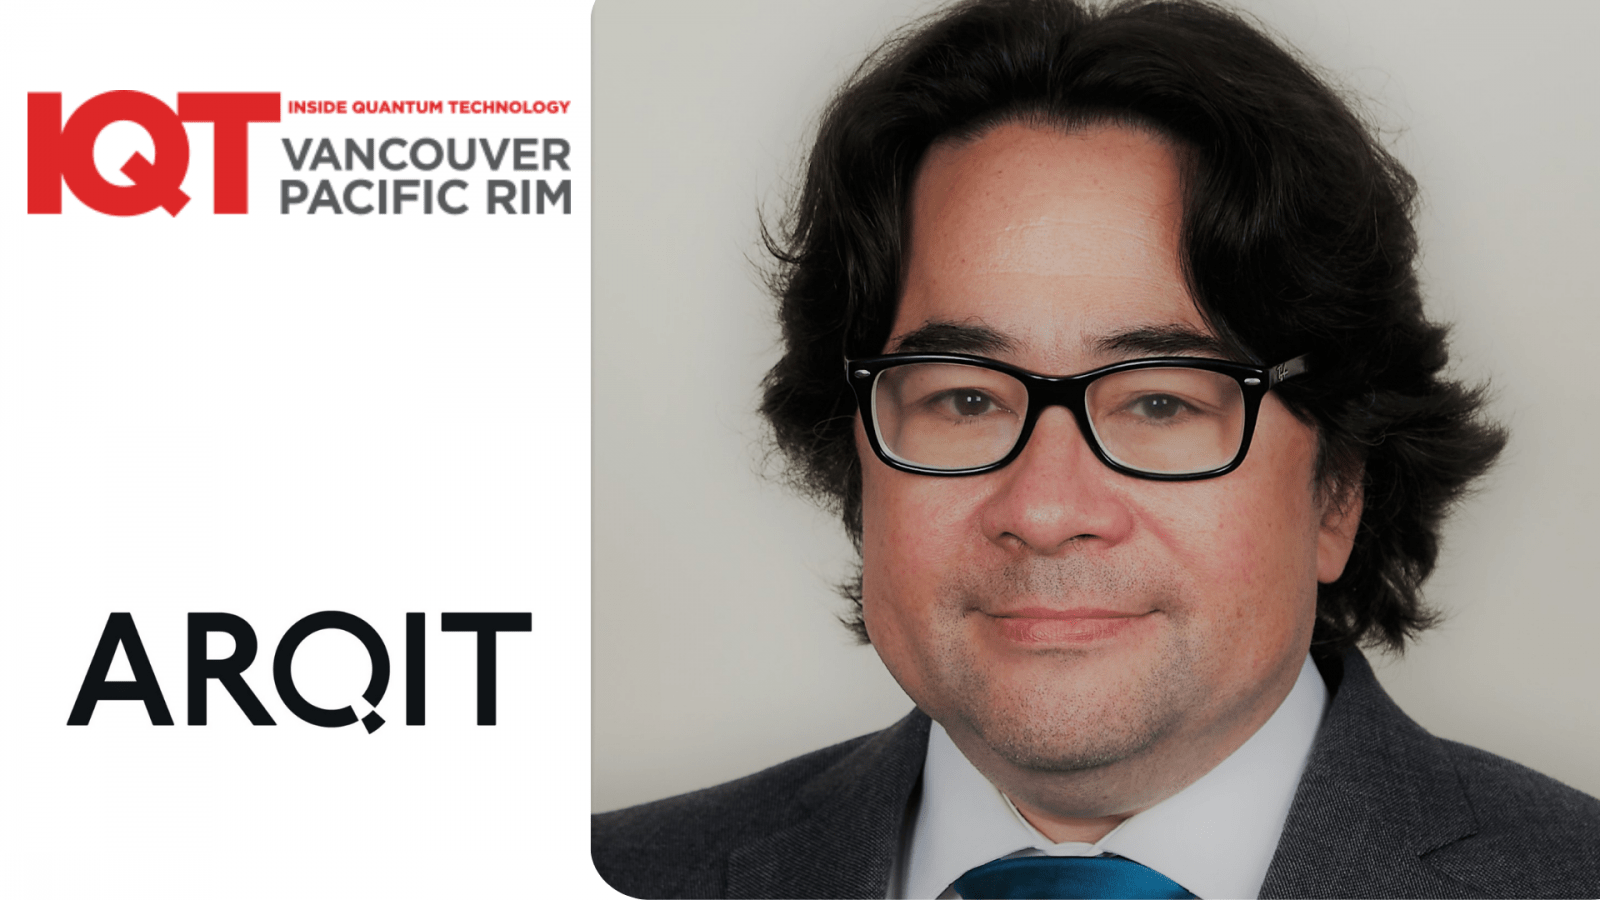 Dr. Daniel Shiu, Chief Cryptographer at Arqit, is a 2024 Speaker at the IQT Vancouver/Pacific Rim conference in June 2024.